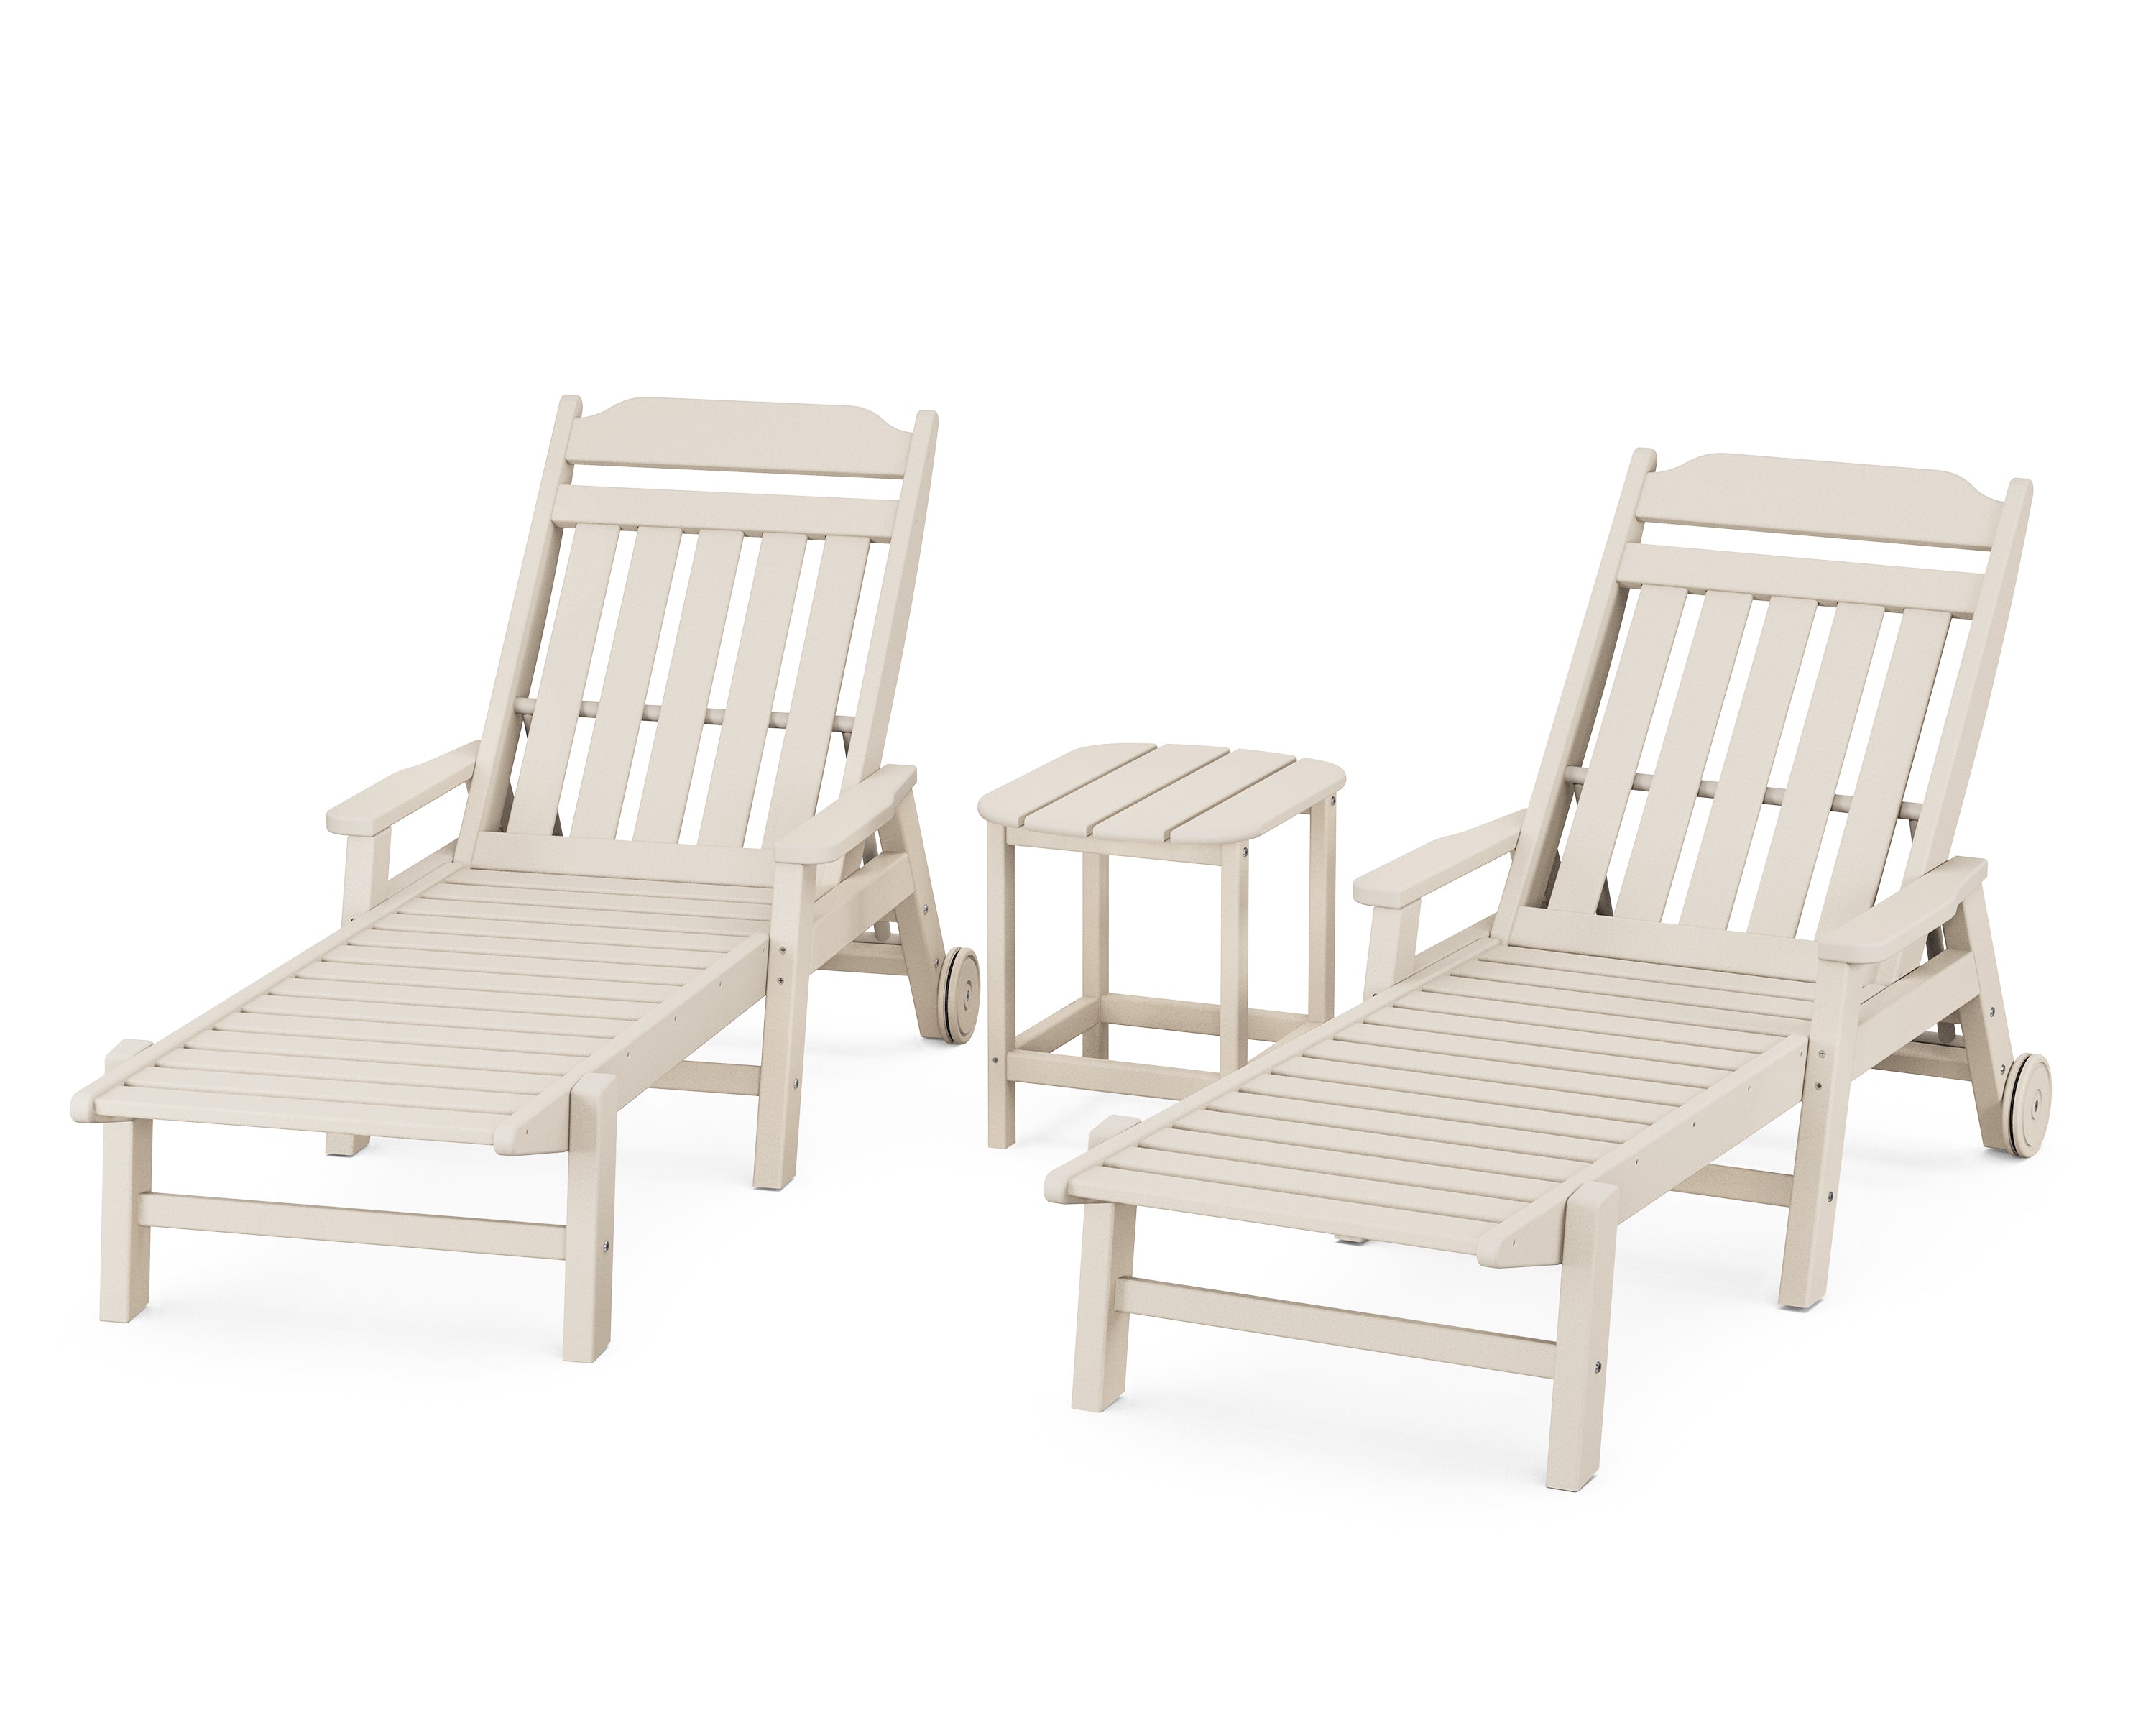 POLYWOOD Country Living 3-Piece Chaise Set with Arms and Wheels in Sand